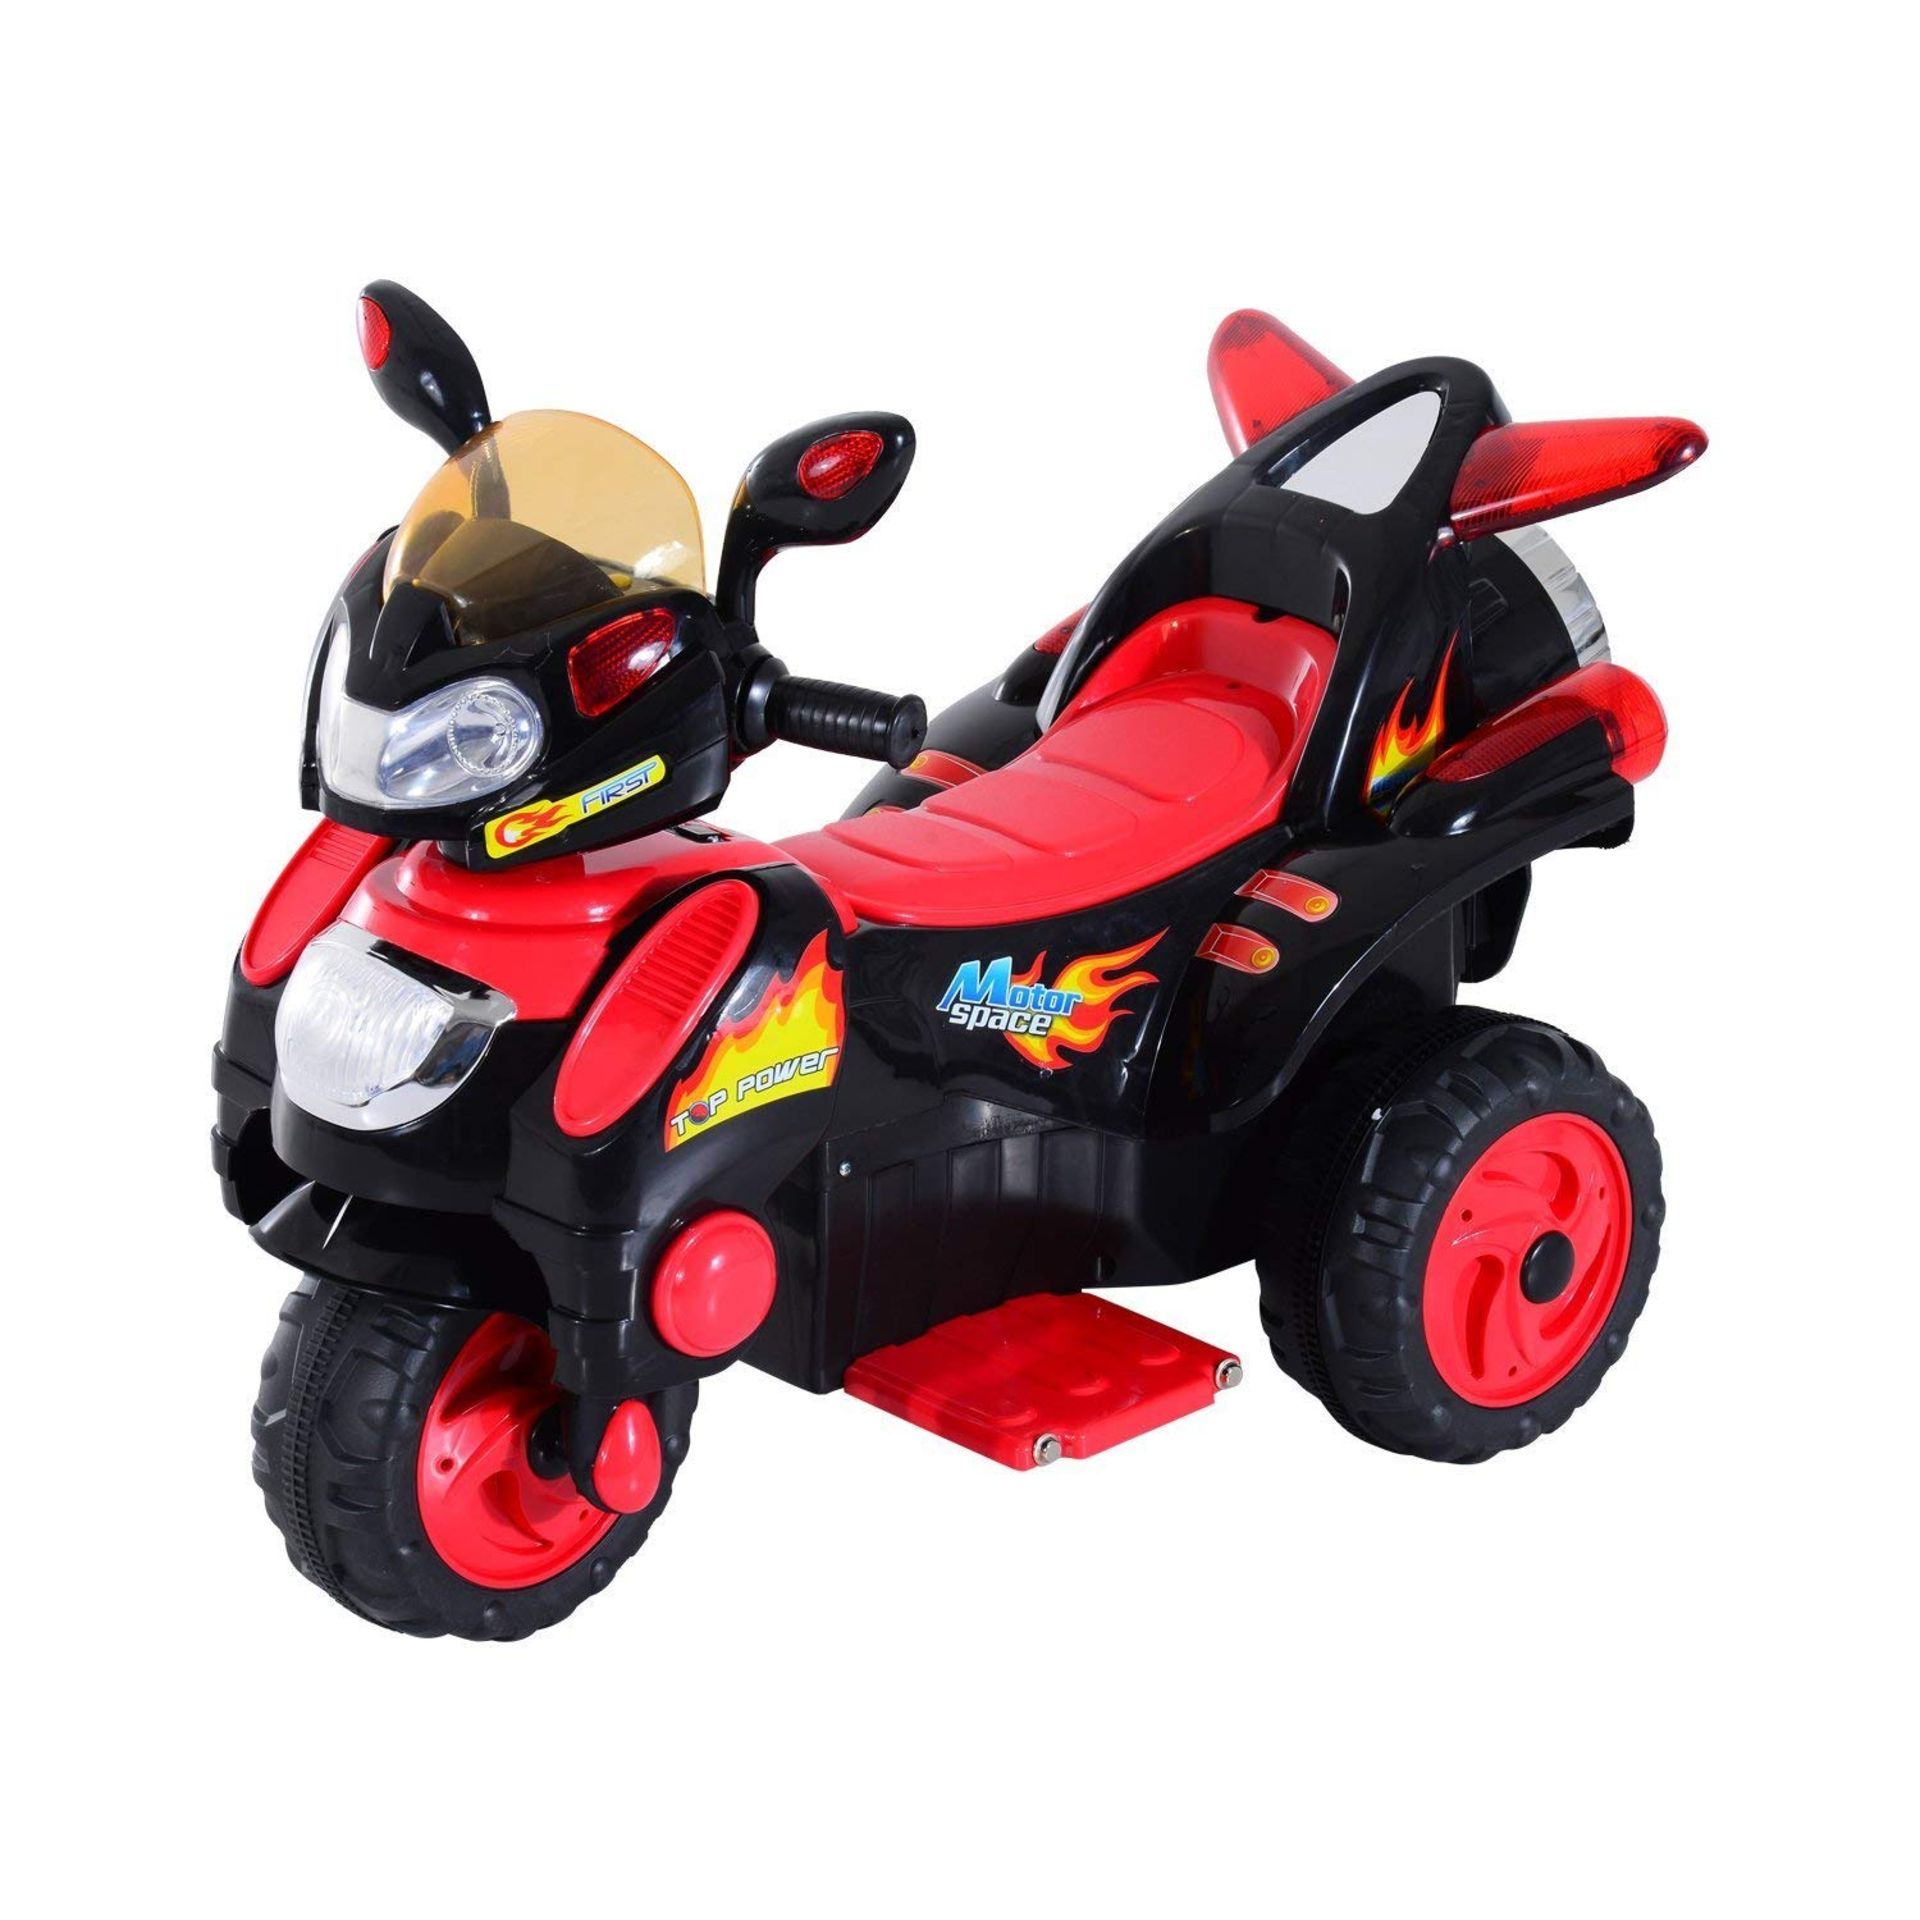 HOMCOM Children Ride On 6V Motorcycle Electric Scooter